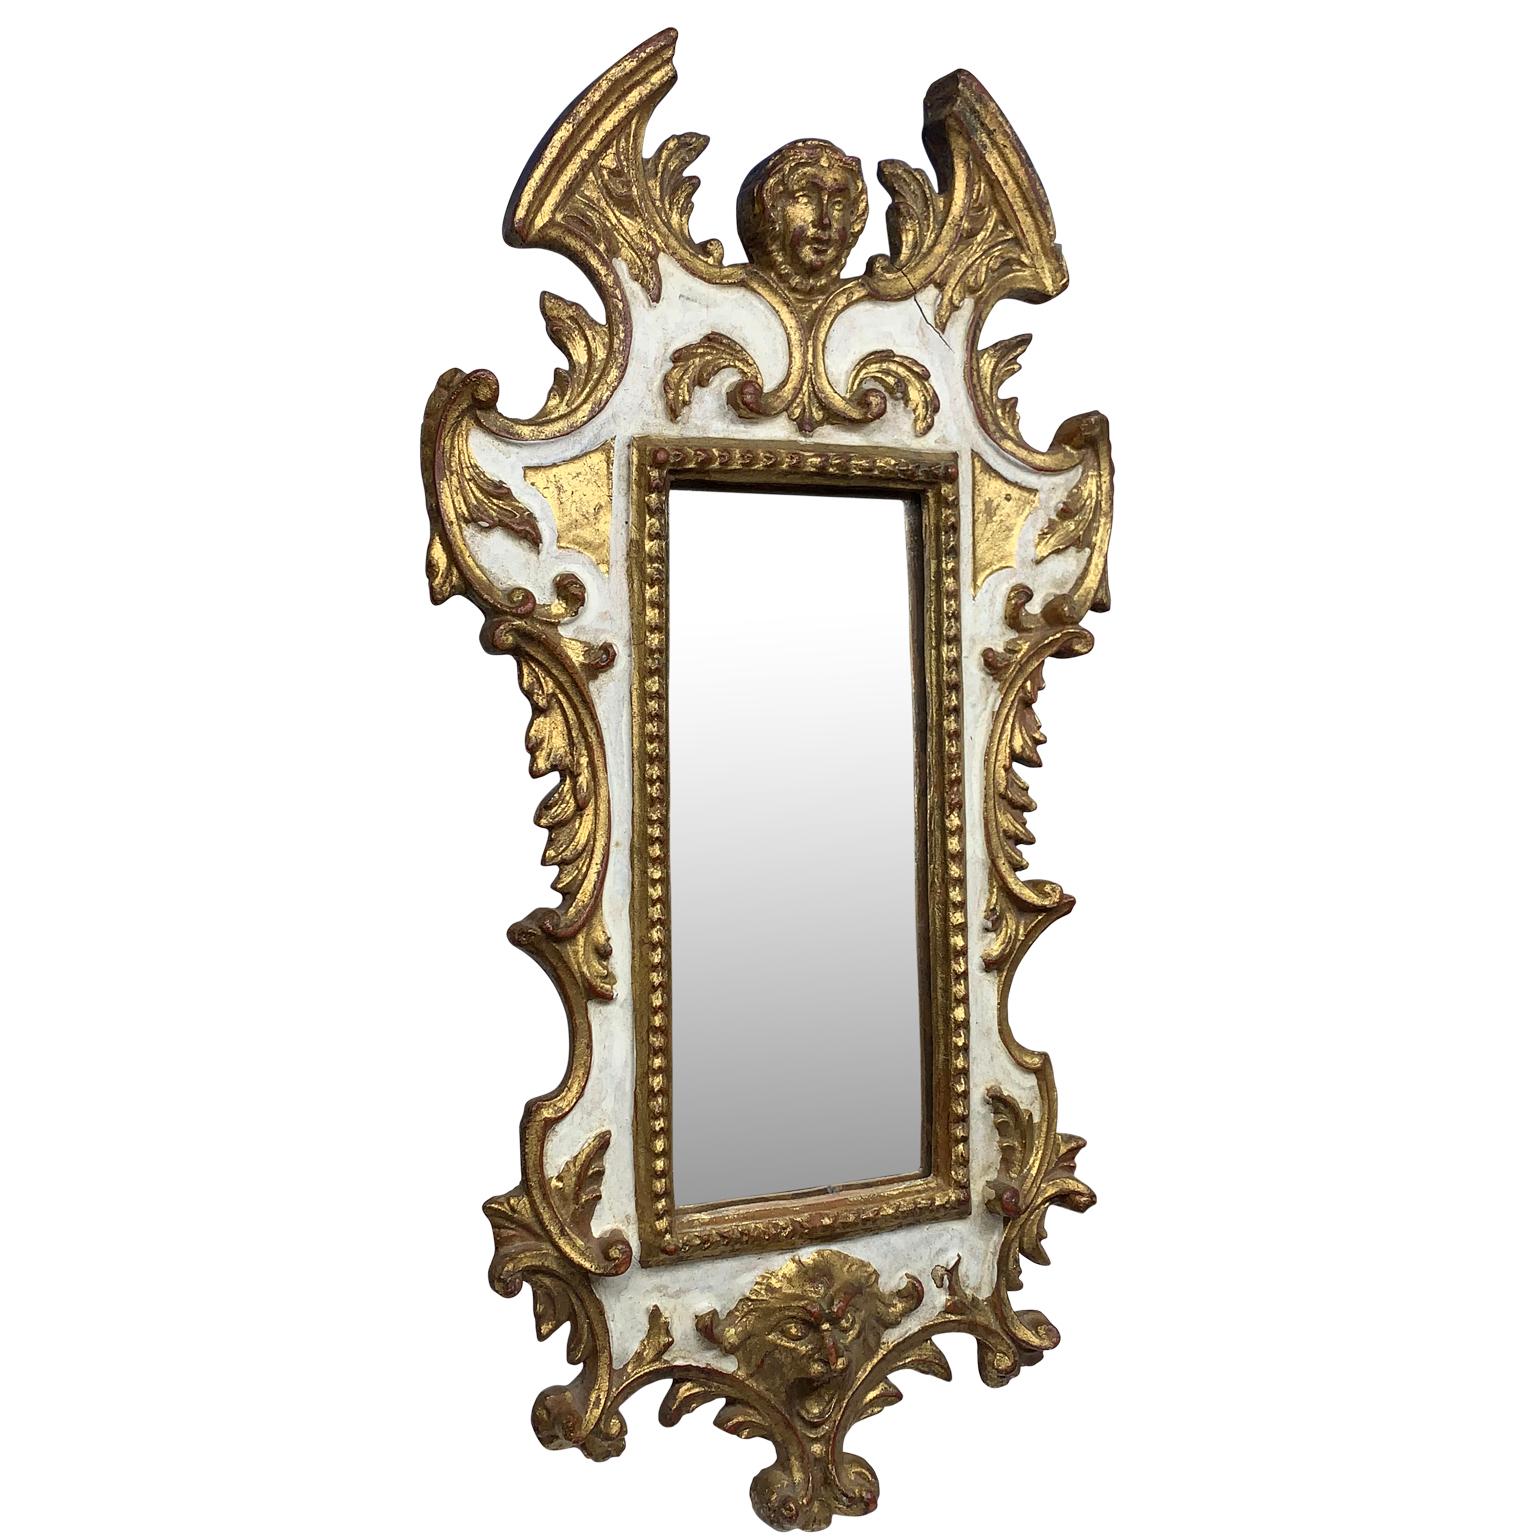 Small Italian Baroque-style gilded wall mirror, Marked Florentia
1950s label on the rear side:
